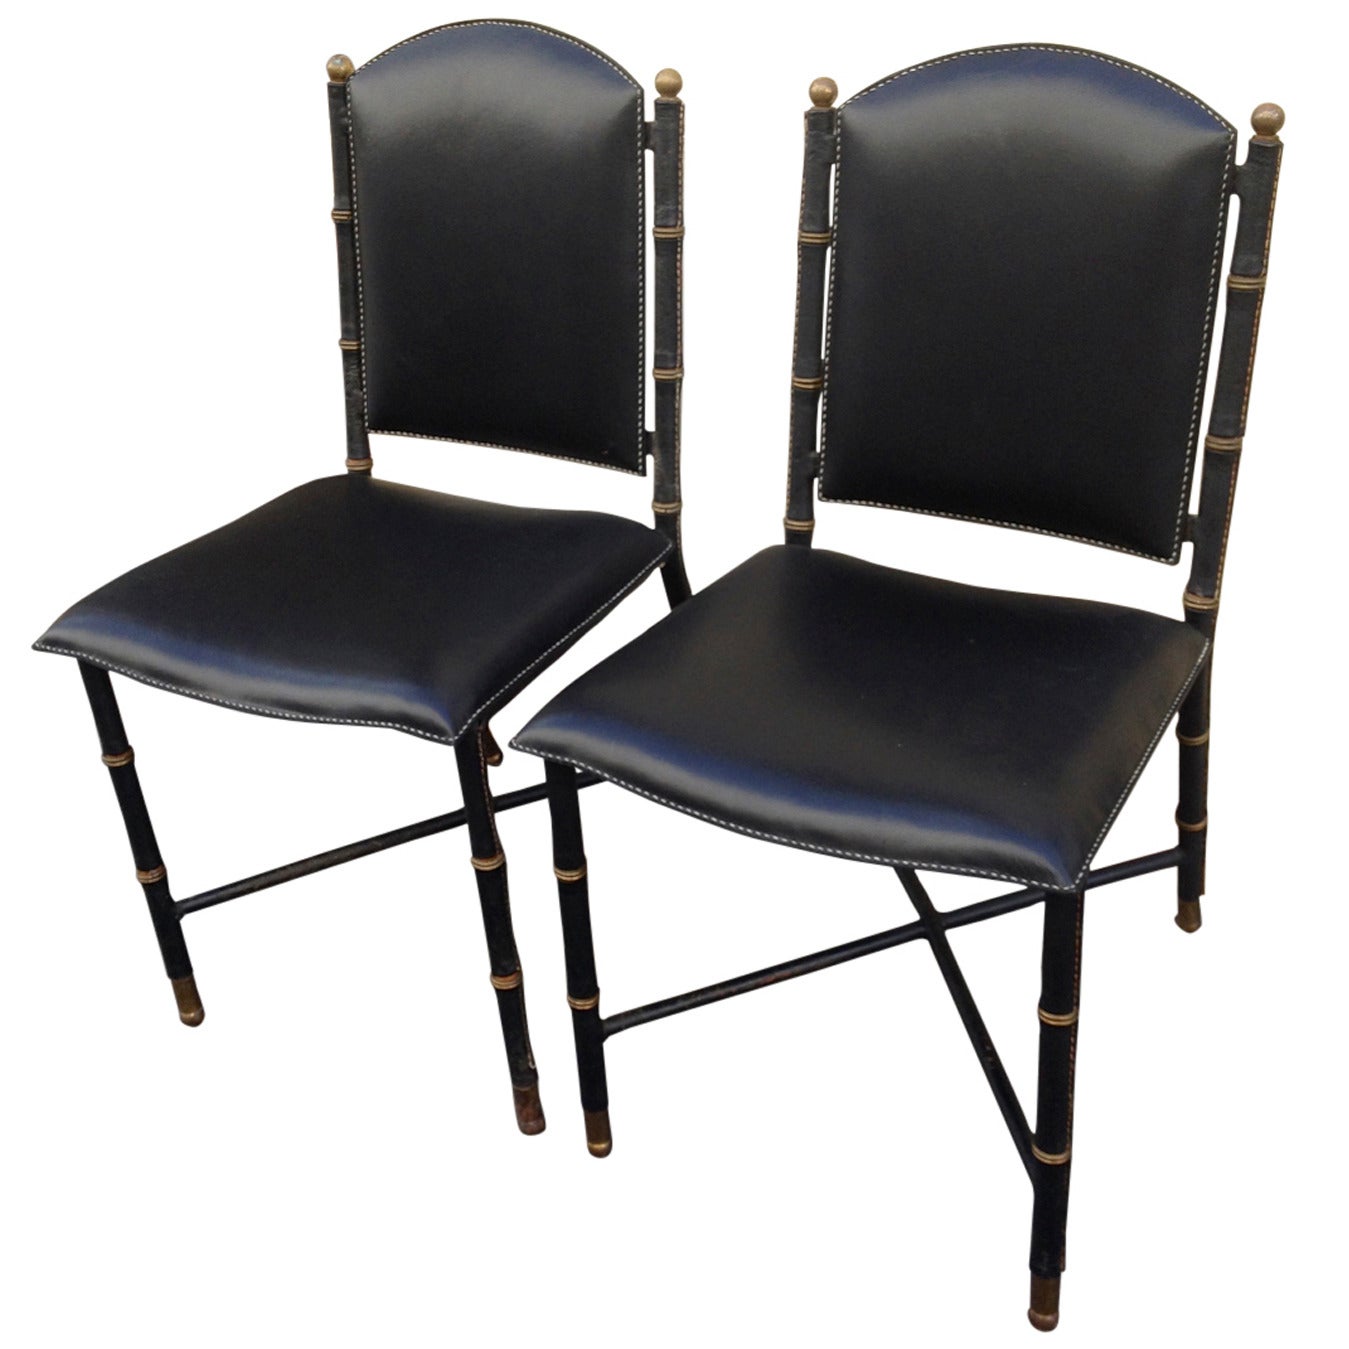 Jacques Adnet Rare Vintage Pair of Hand-Stitched Black Leather Chairs For Sale